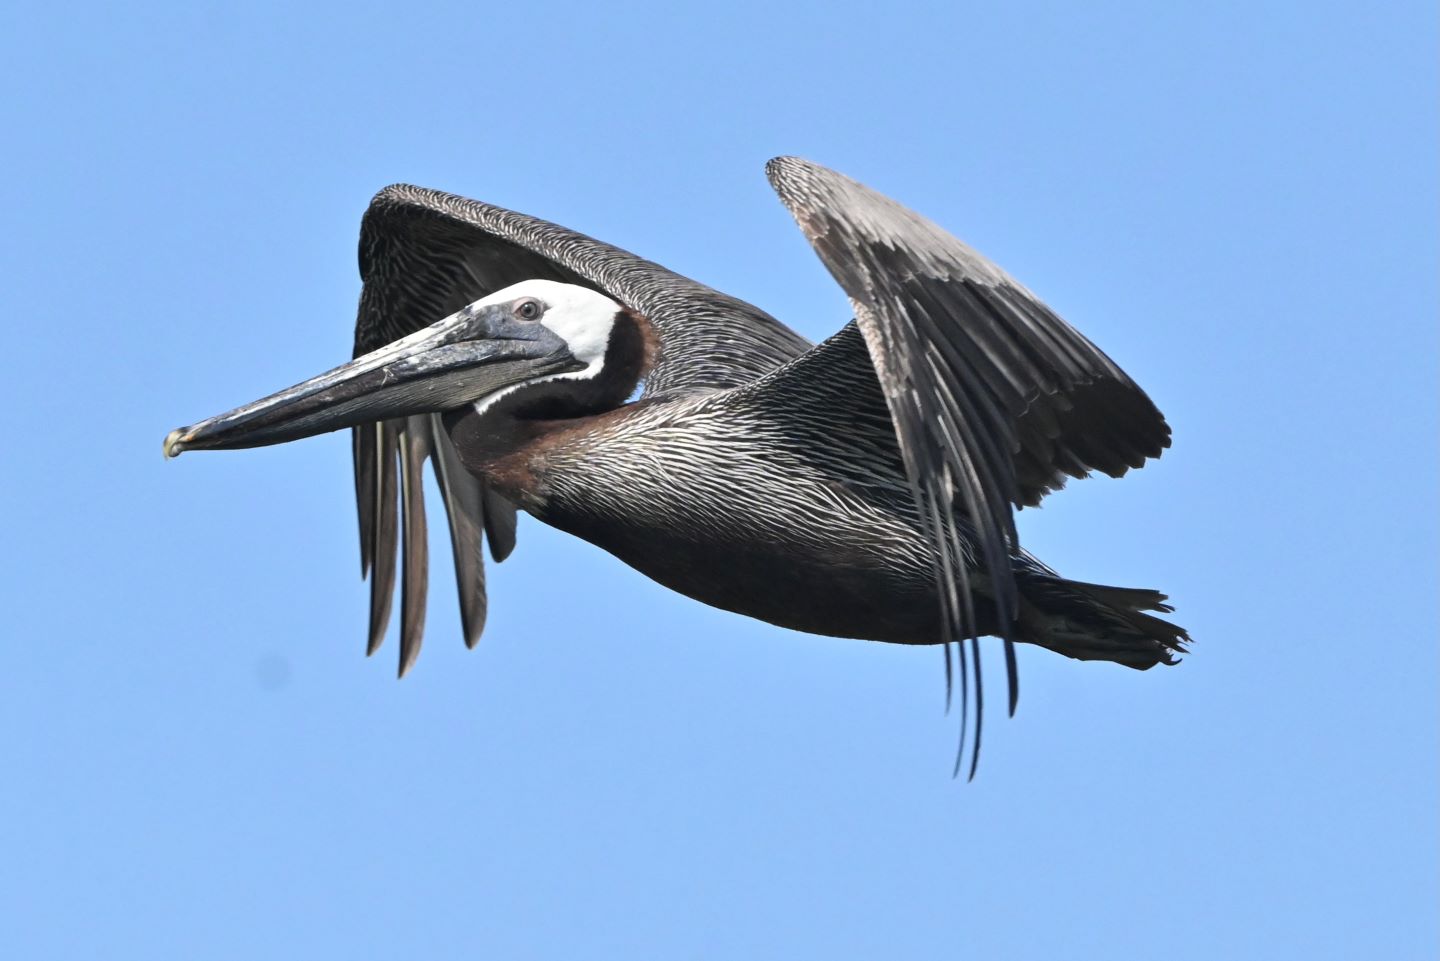 3rd PrizeNature In Class 1 By Clara Licata For Smith Island Pelican Fly Over JAN-2022.jpg